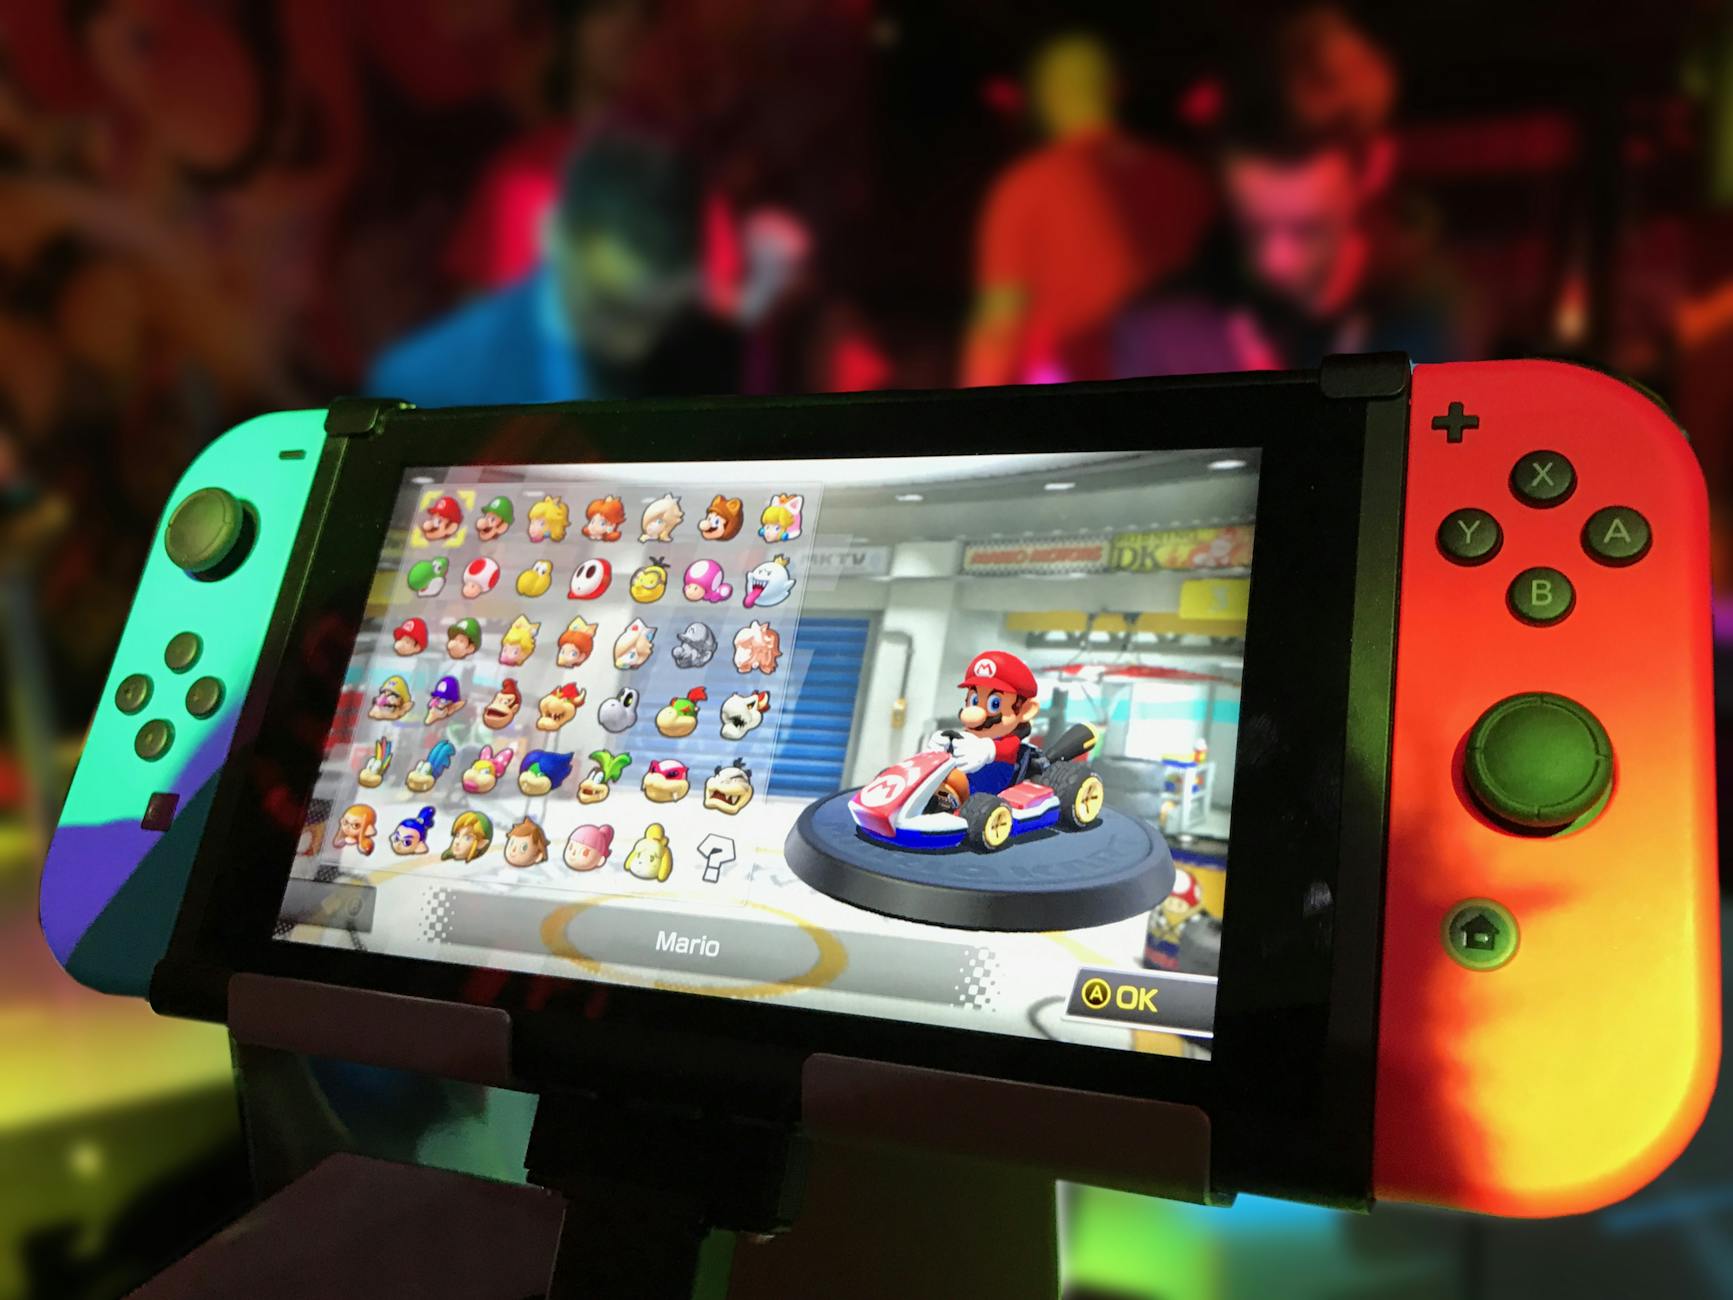 An image of a Nintendo switch with Mario game in-display.